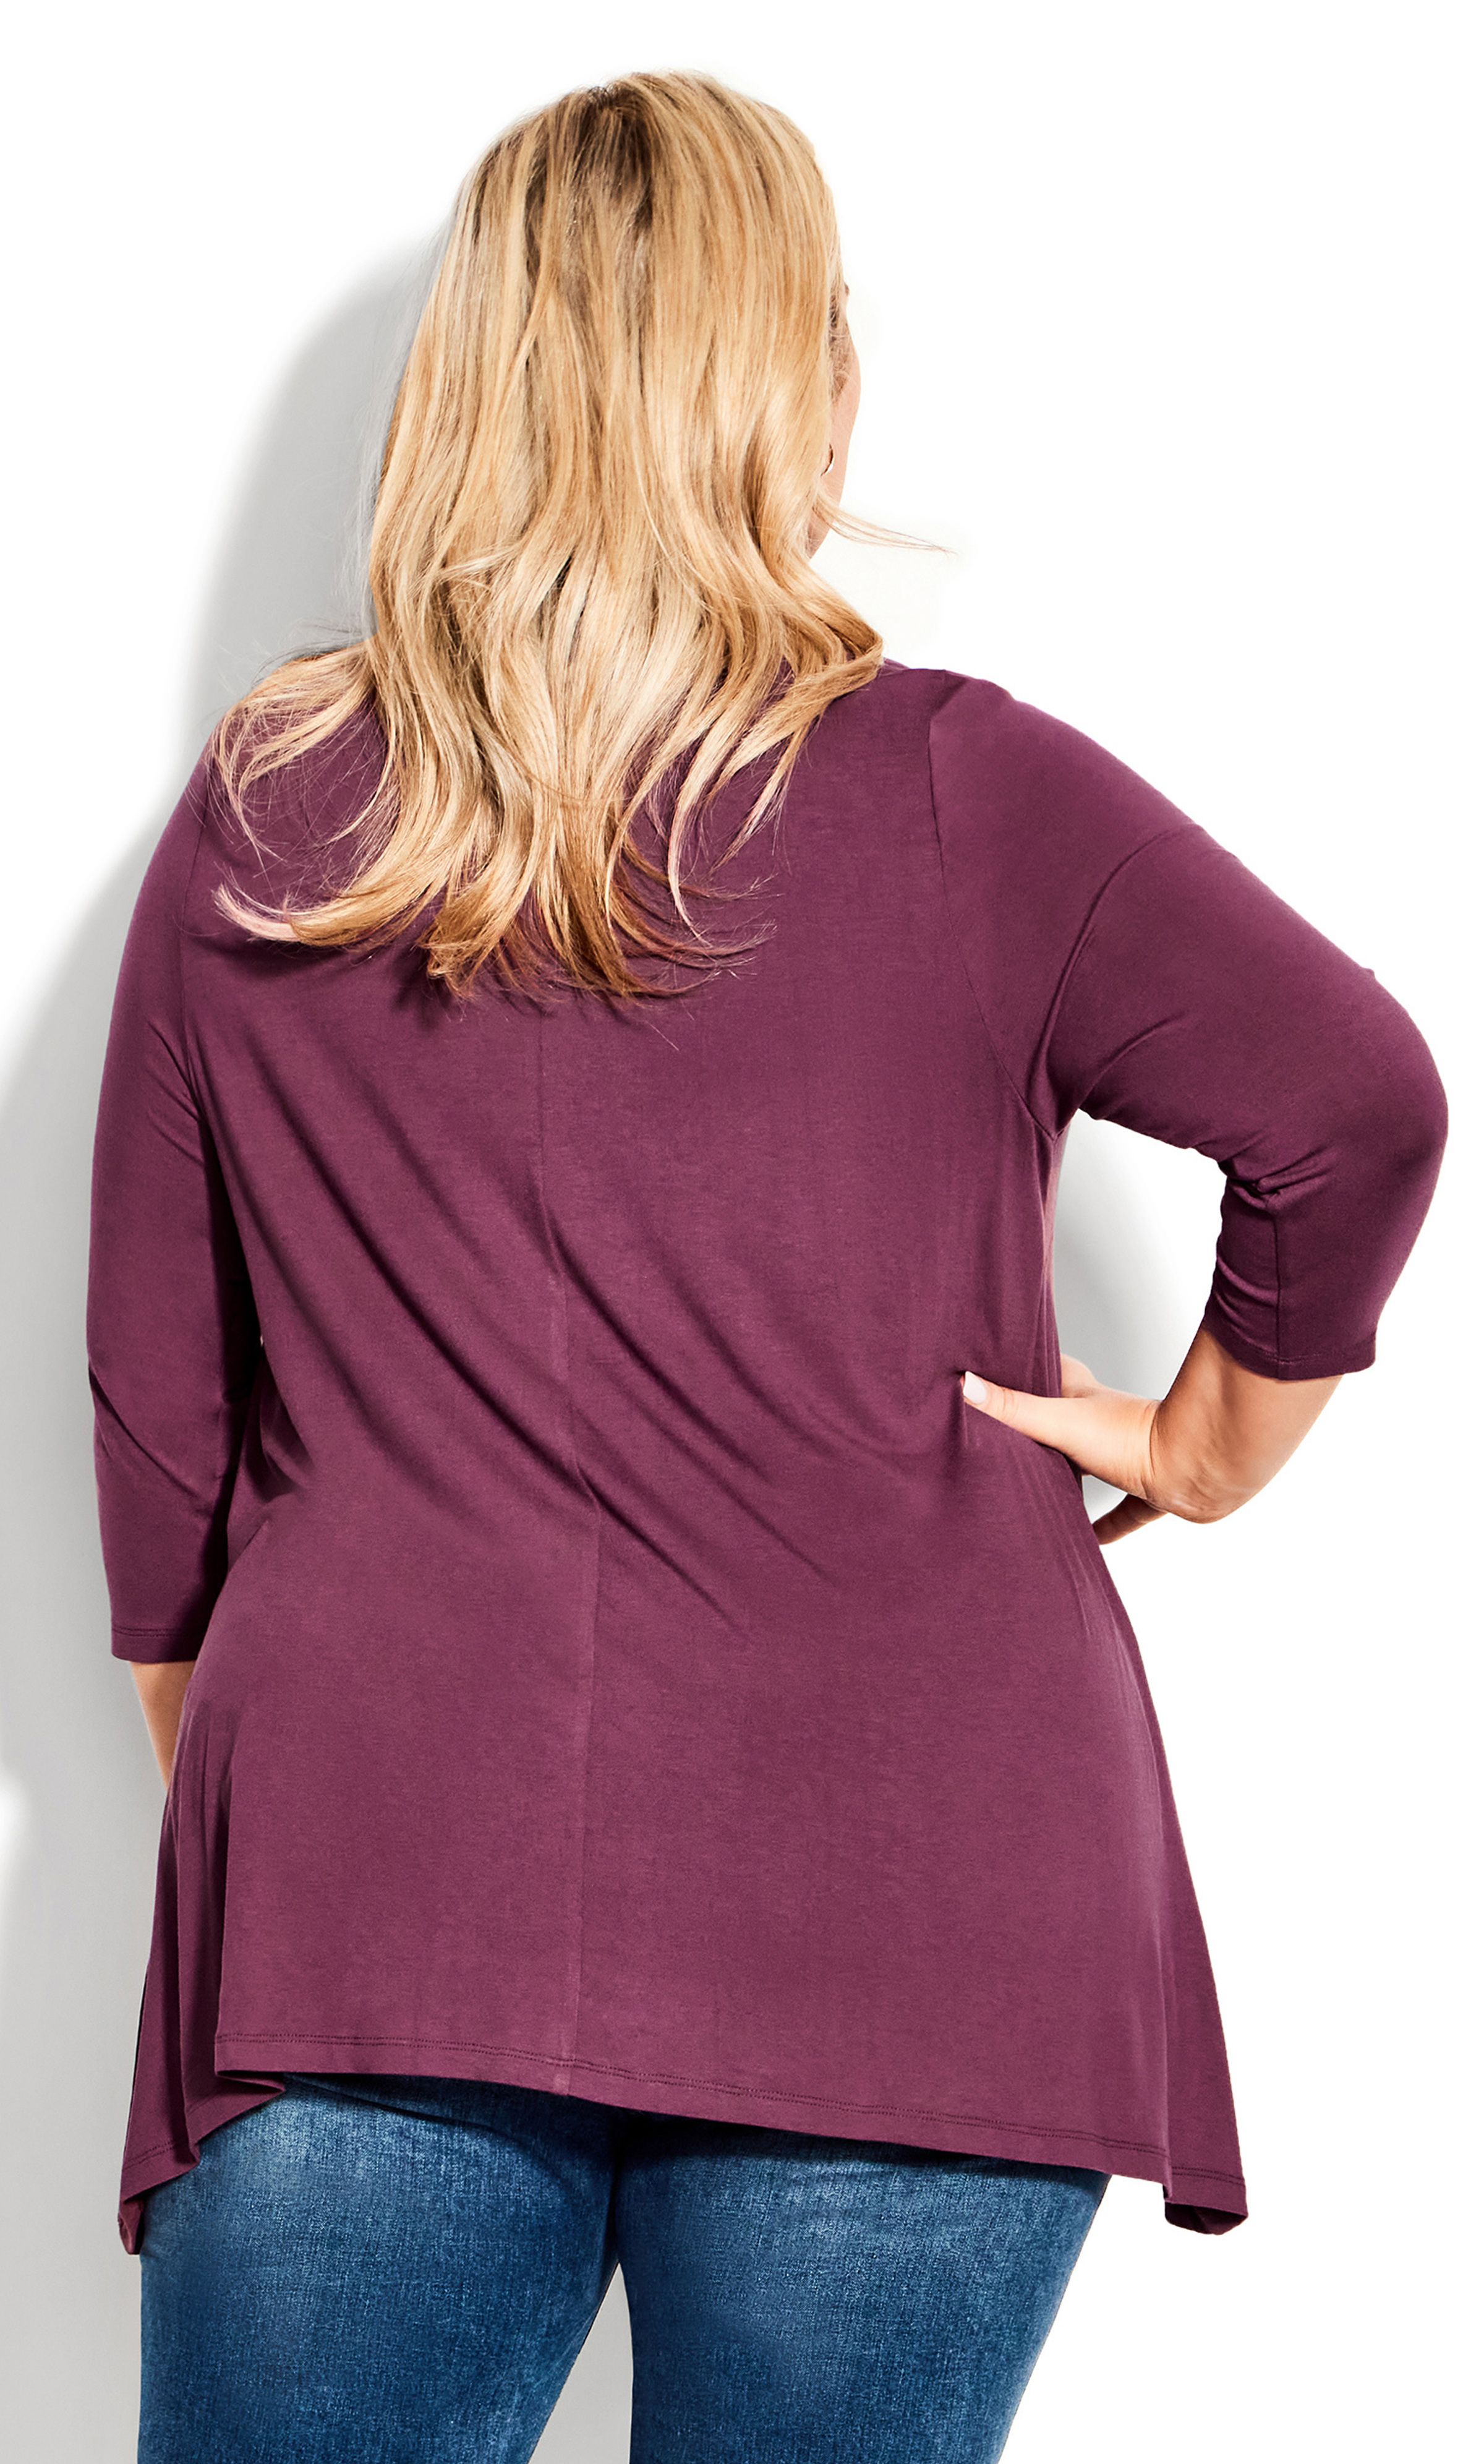 Create the perfect everyday style with the Ellis Plain Tunic. In a dreamy plum shade, this relaxed top shows off your curves in a classic silhouette with a center pleat detail. Key Features Include: - V-neckline - 3/4 length sleeves - Pull-over style - Darted bust for shape - Center pleat detail - Relaxed fit - Soft stretch fabrication - Below hip length hemline Layer up with a denim jacket and a pair of leggings.